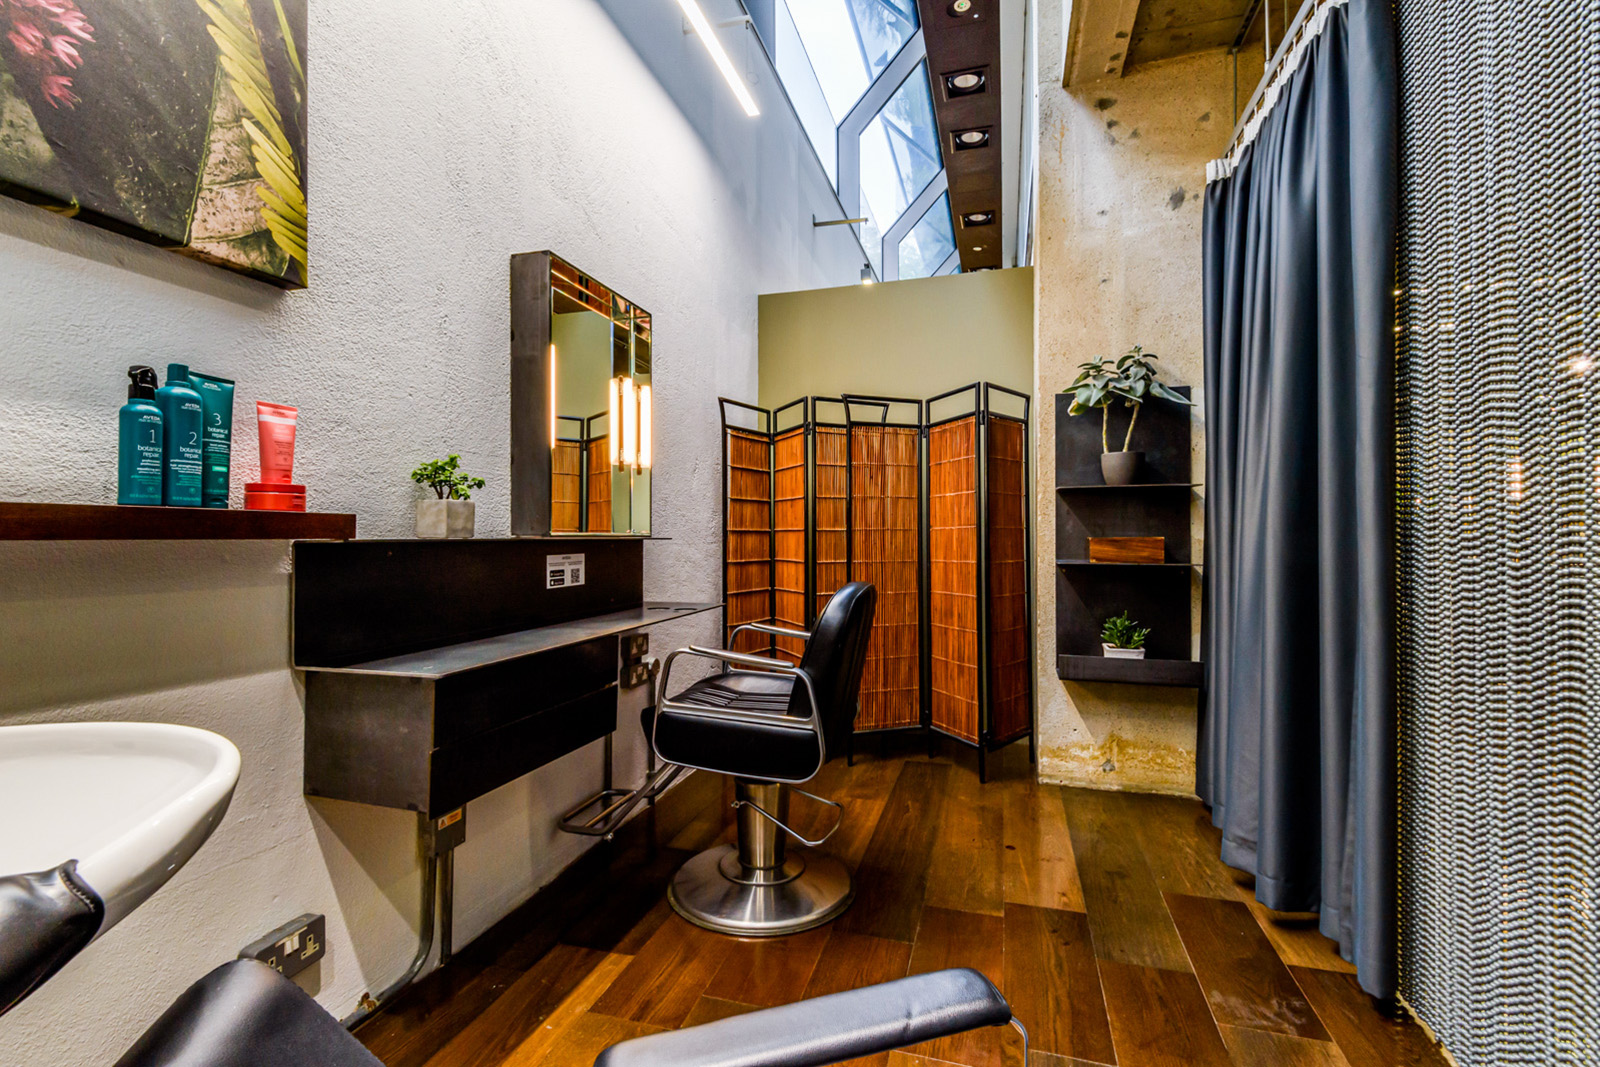 High-end hijab-friendly hair salons are finally here